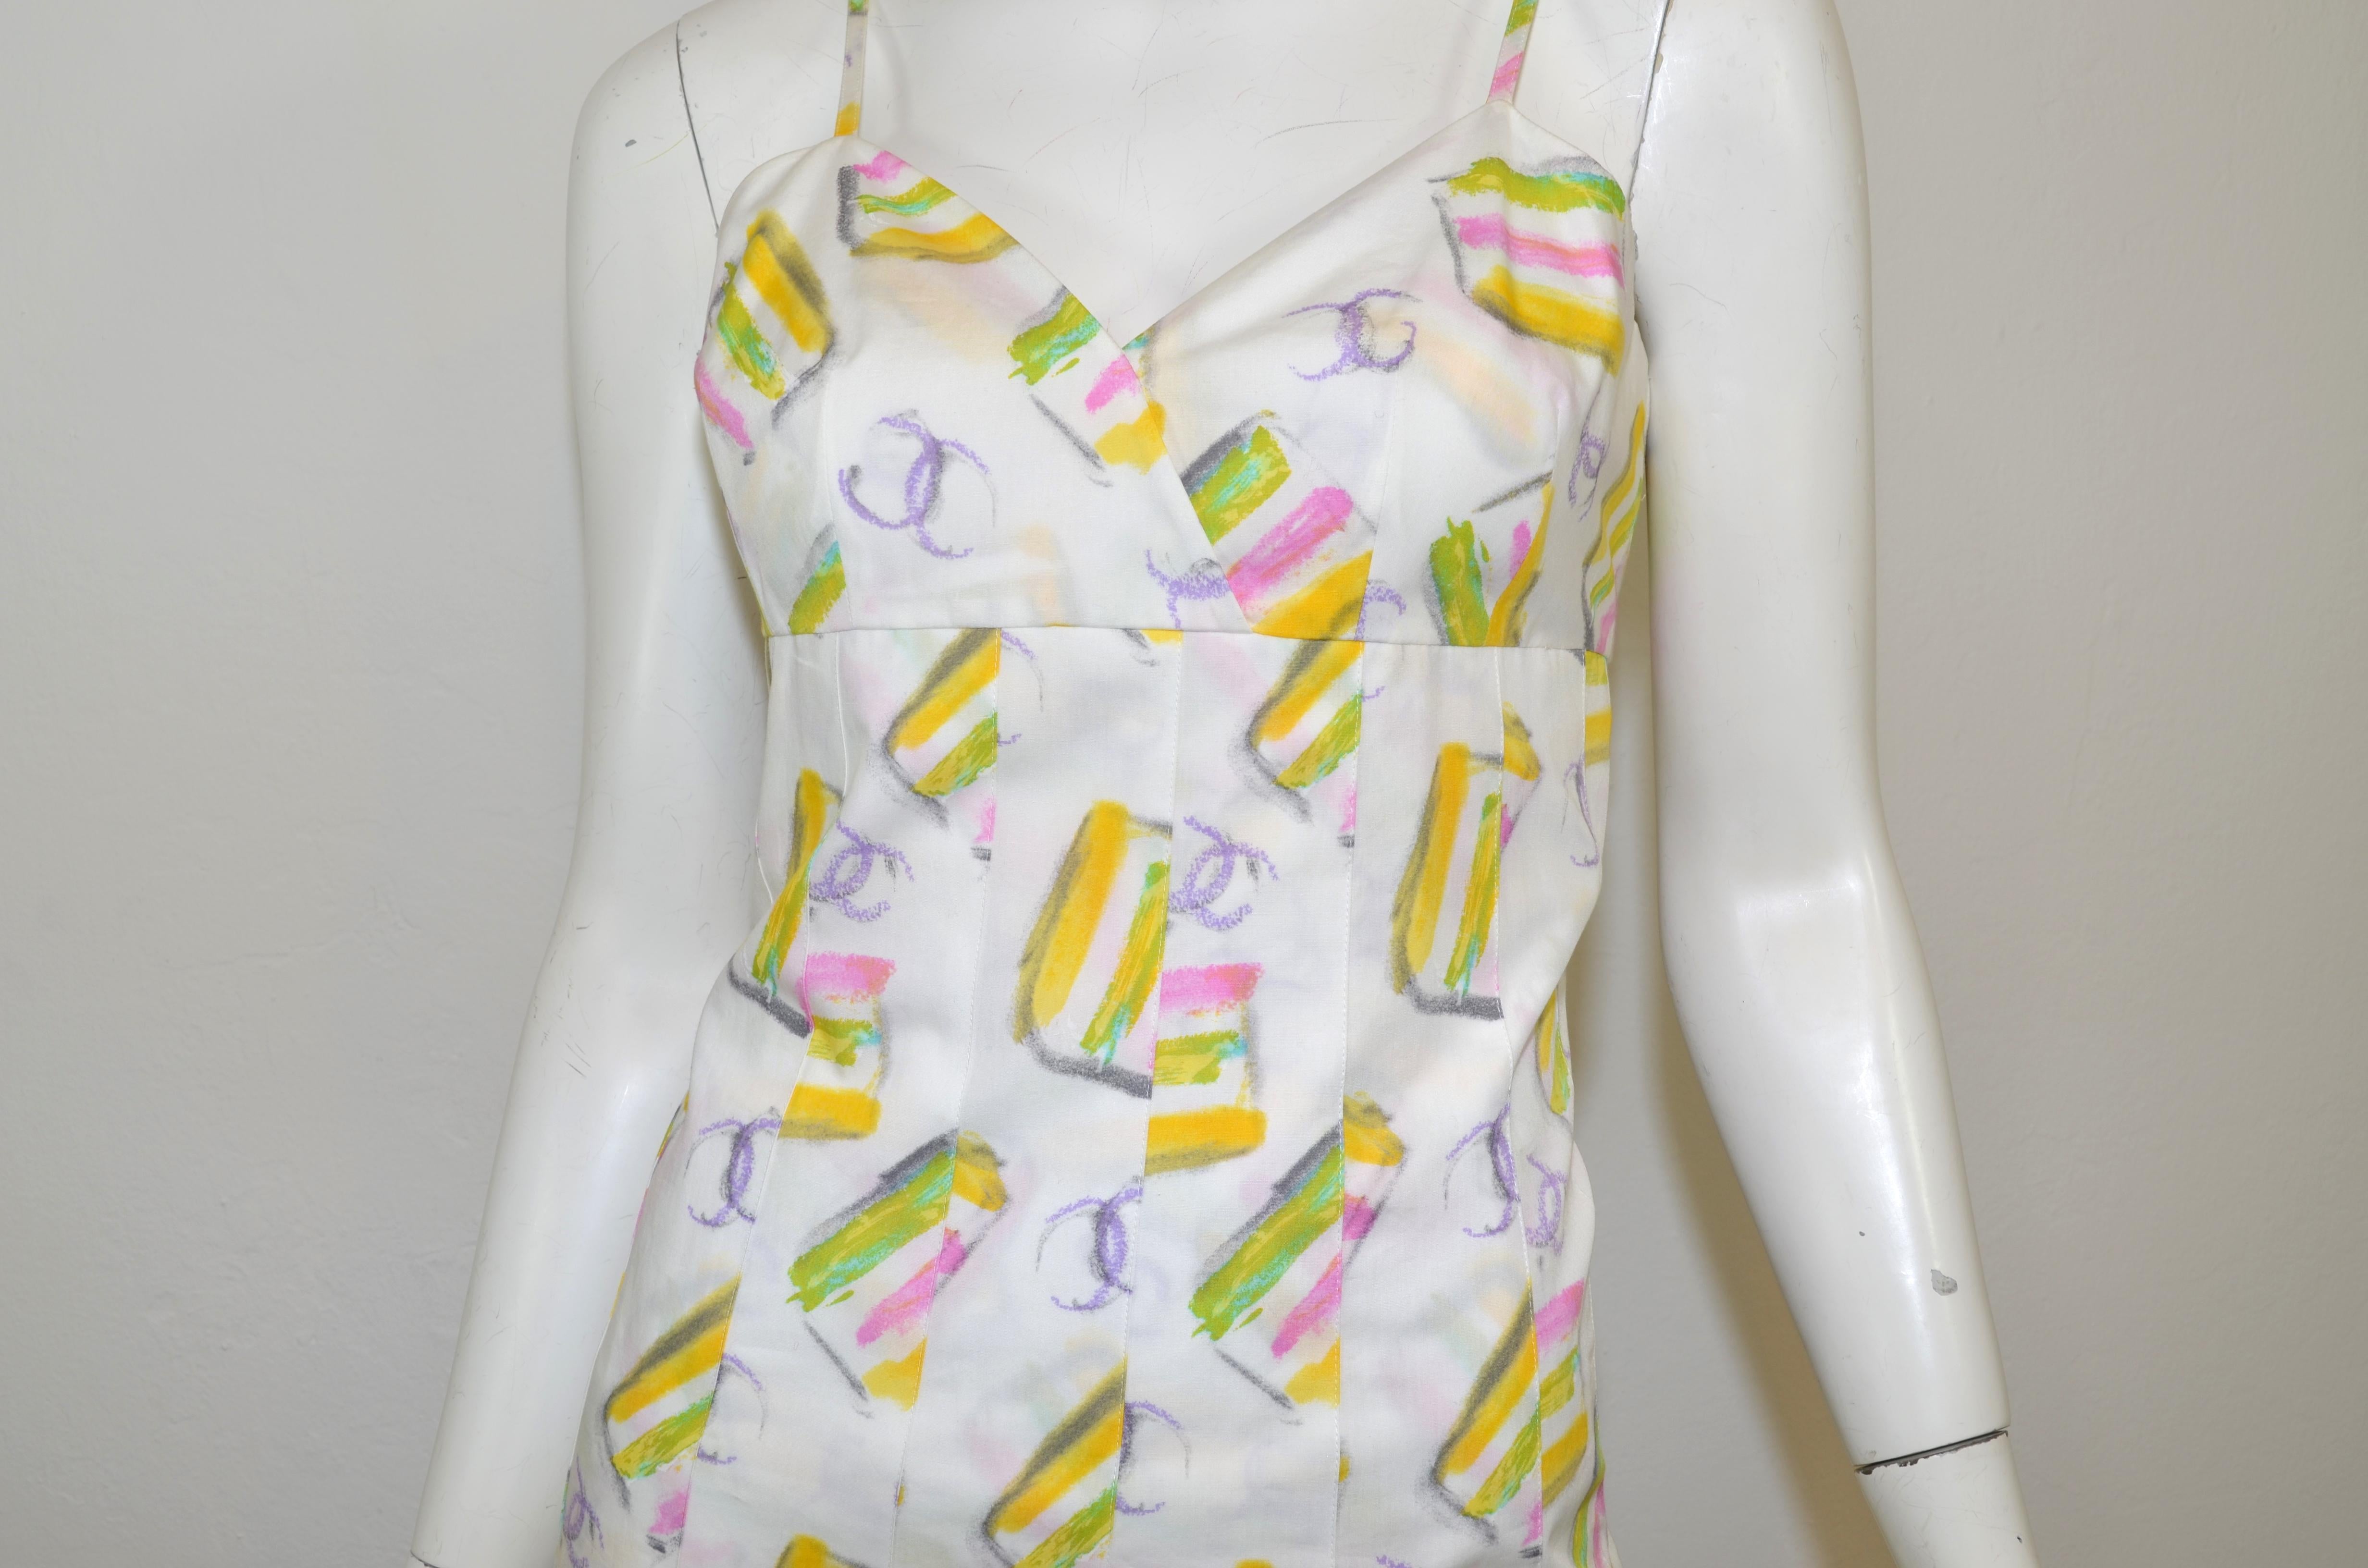 Chanel ice cream print cotton dress from the vintage 2004 Cruise Collection. Dress has spagetti srtaps, a fitted bodice and pleated skirt. Made from 100% cotton. Print is in sorbet pastel colors on a white backgtound with lavender brush stroke CC